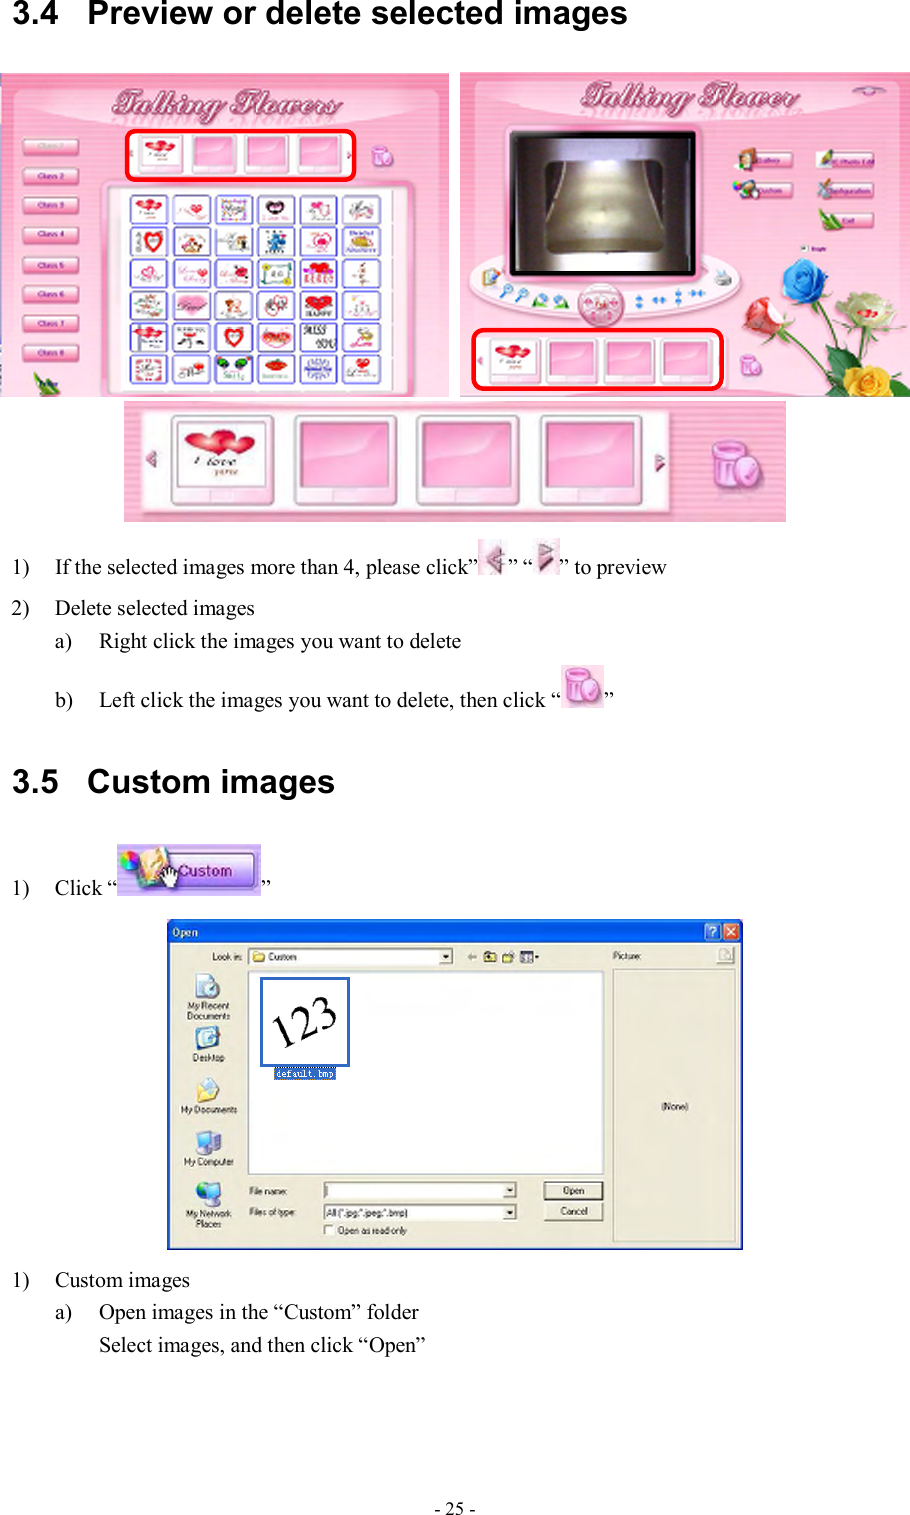  - 25 - 3.4  Preview or delete selected images     1) If the selected images more than 4, please click” ” “ ” to preview 2) Delete selected images a) Right click the images you want to delete b) Left click the images you want to delete, then click “ ” 3.5  Custom images 1) Click “ ”  1) Custom images a) Open images in the “Custom” folder Select images, and then click “Open” 